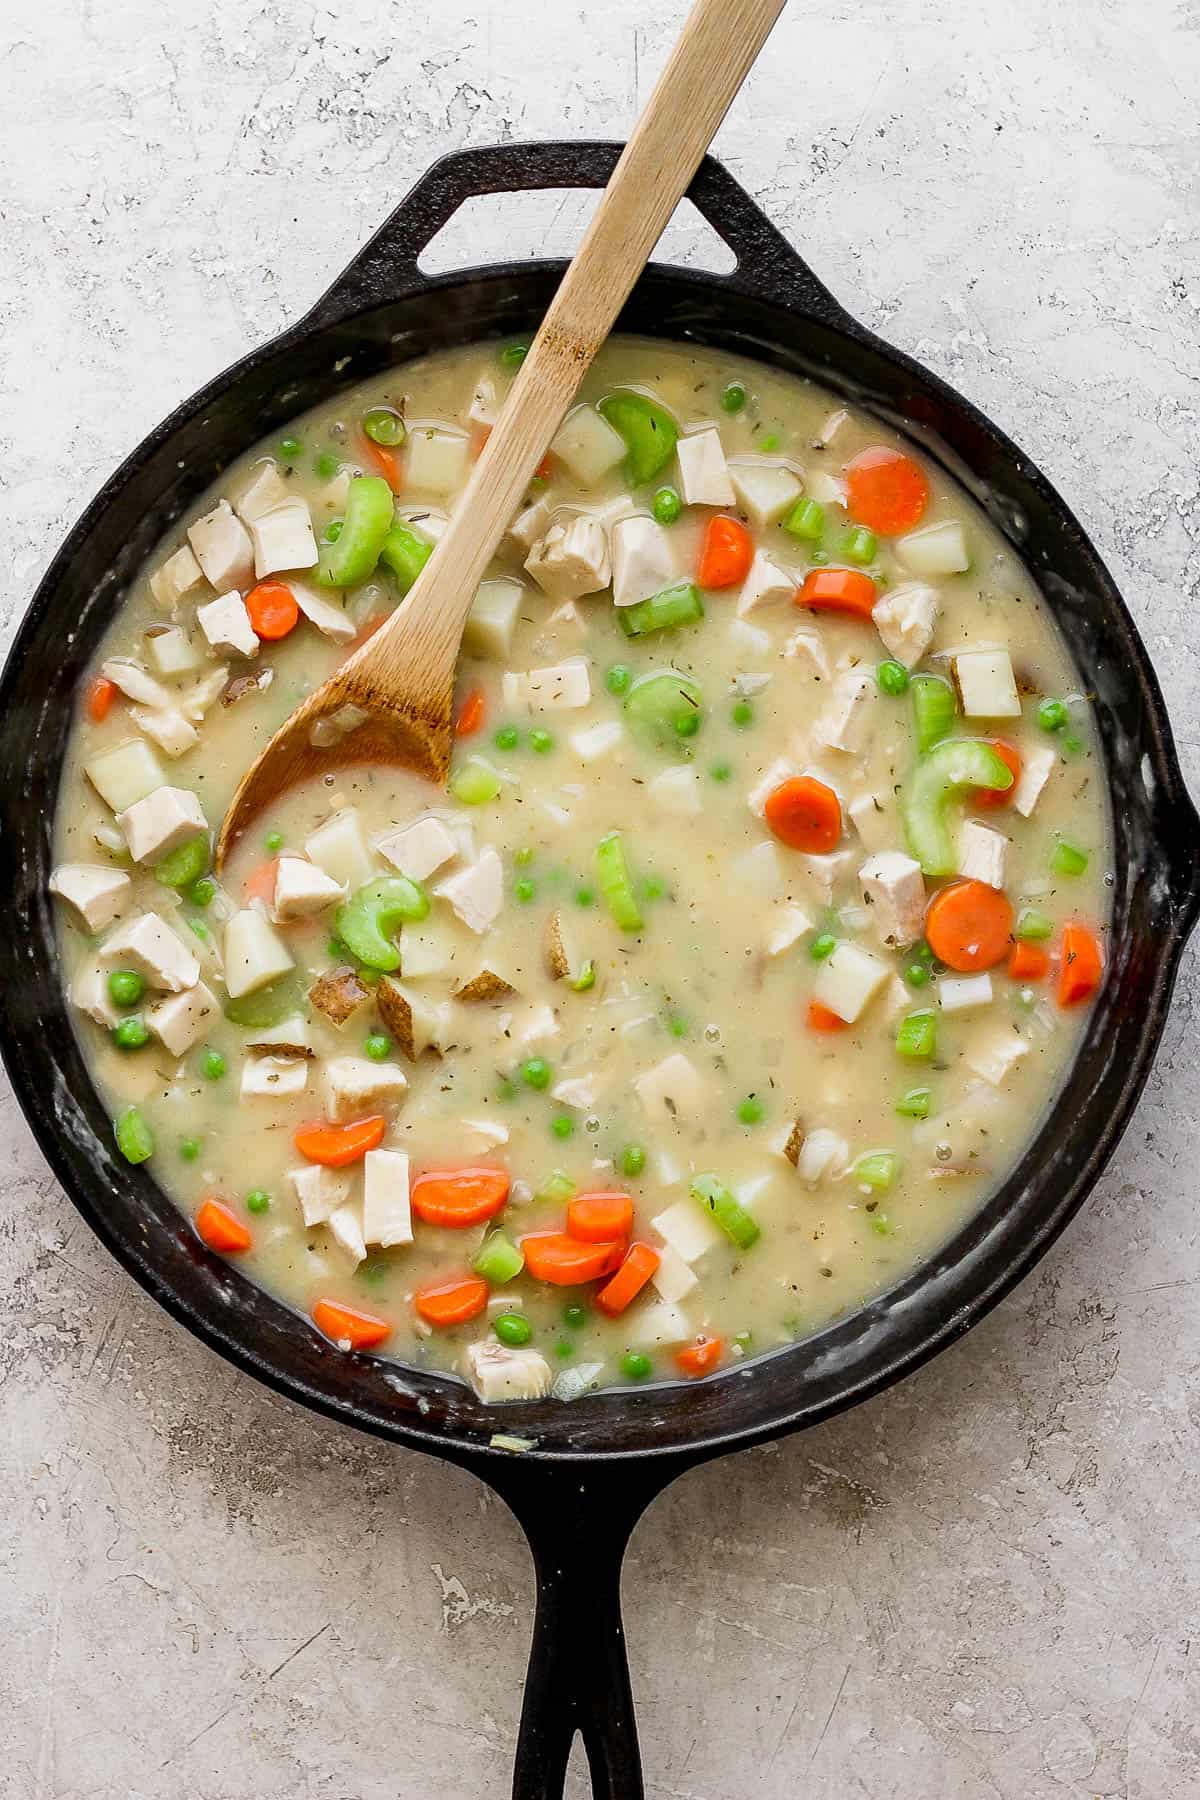 The entire chicken pot pie filling mixed together in the cast iron skillet with a wooden spoon.